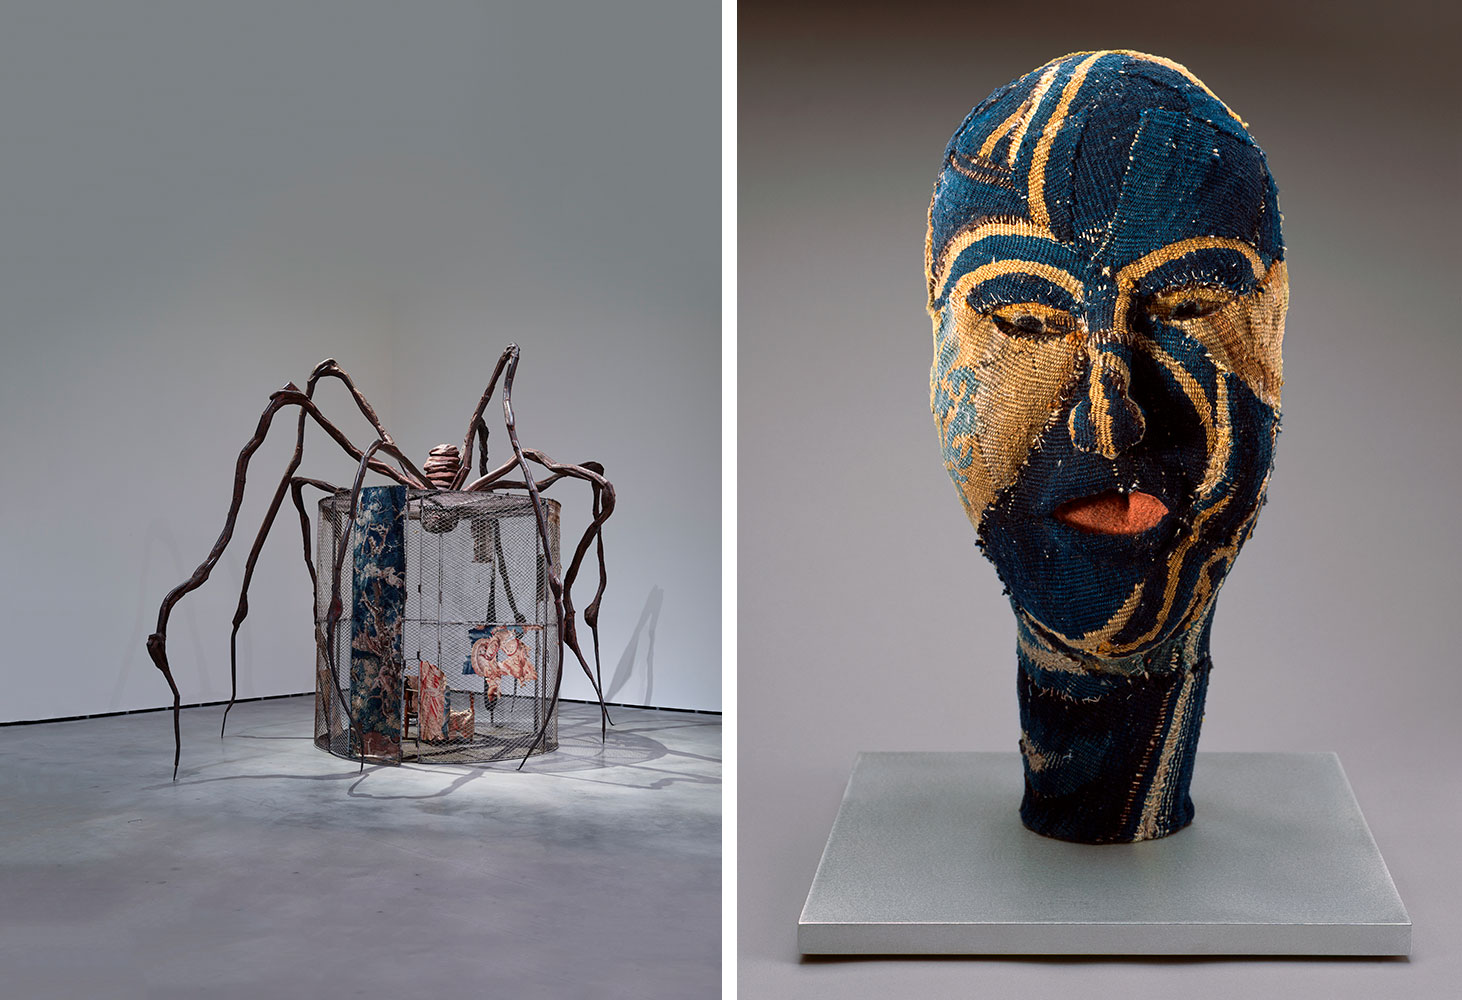 Louise Bourgeois: The Spider and the Tapestries by Bourgeois, Louise: Near  Fine Hardcover (2015) First Trade Edition.